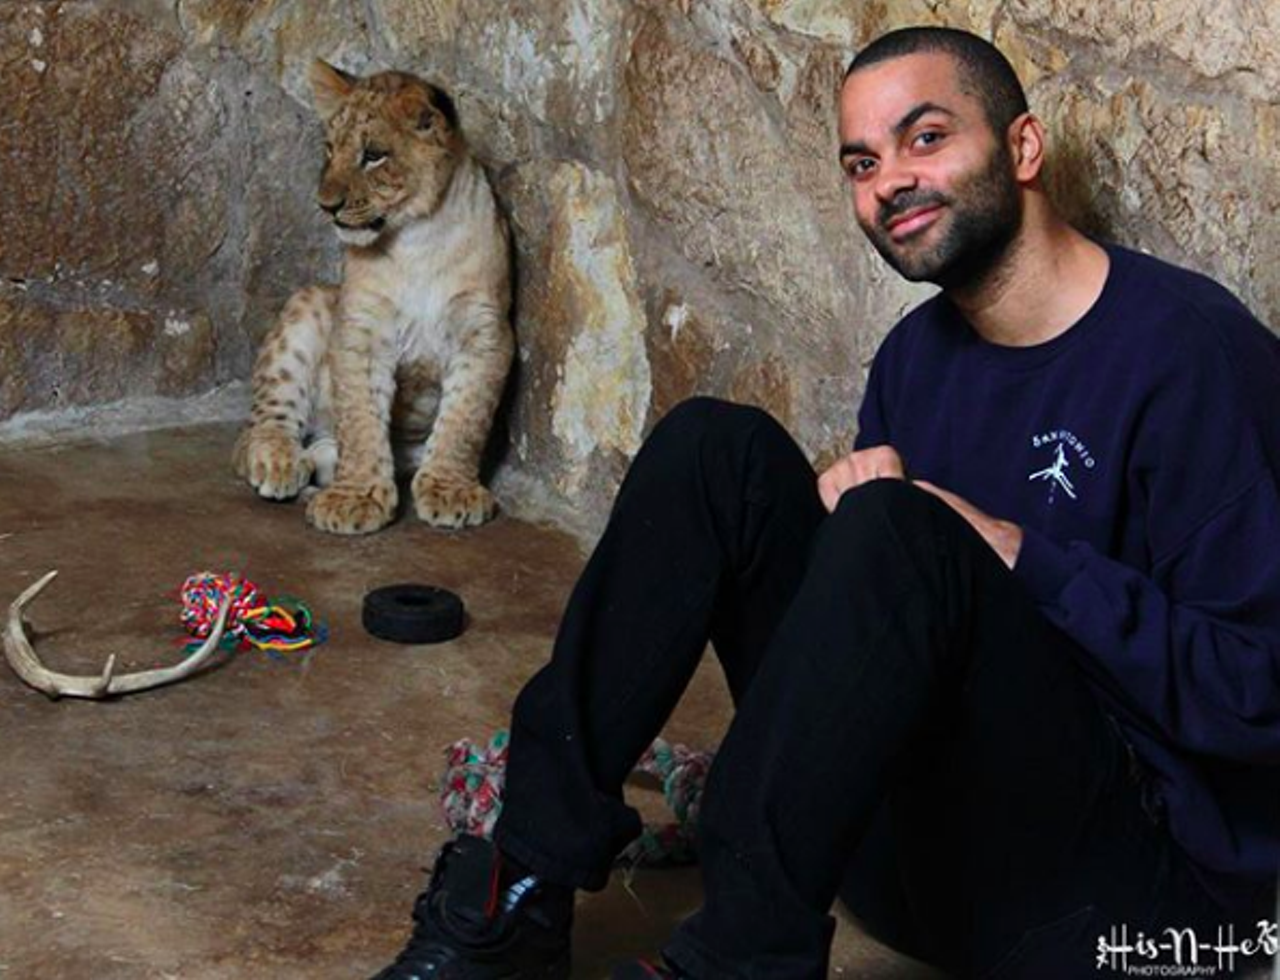 He named cubs at the San Antonio Zoo.
When you’ve got as much pull as Tony Parker does, it only makes sense that you get to do cool stuff — like name lion cubs born at the local zoo. Ok, he won a bid to do so at a zoo fundraiser, but that’s what his wealth is for, right? In 2015, he took the opportunity to name a trio of cubs after his family: TP (himself, duh), Axelle (his wife) and Josh (his son). The following year, Tony got to name jaguar cubs born at the zoo, christening them Milan and Liam.
Photo by @hisnherphotography via Instagram / _tonyparker09